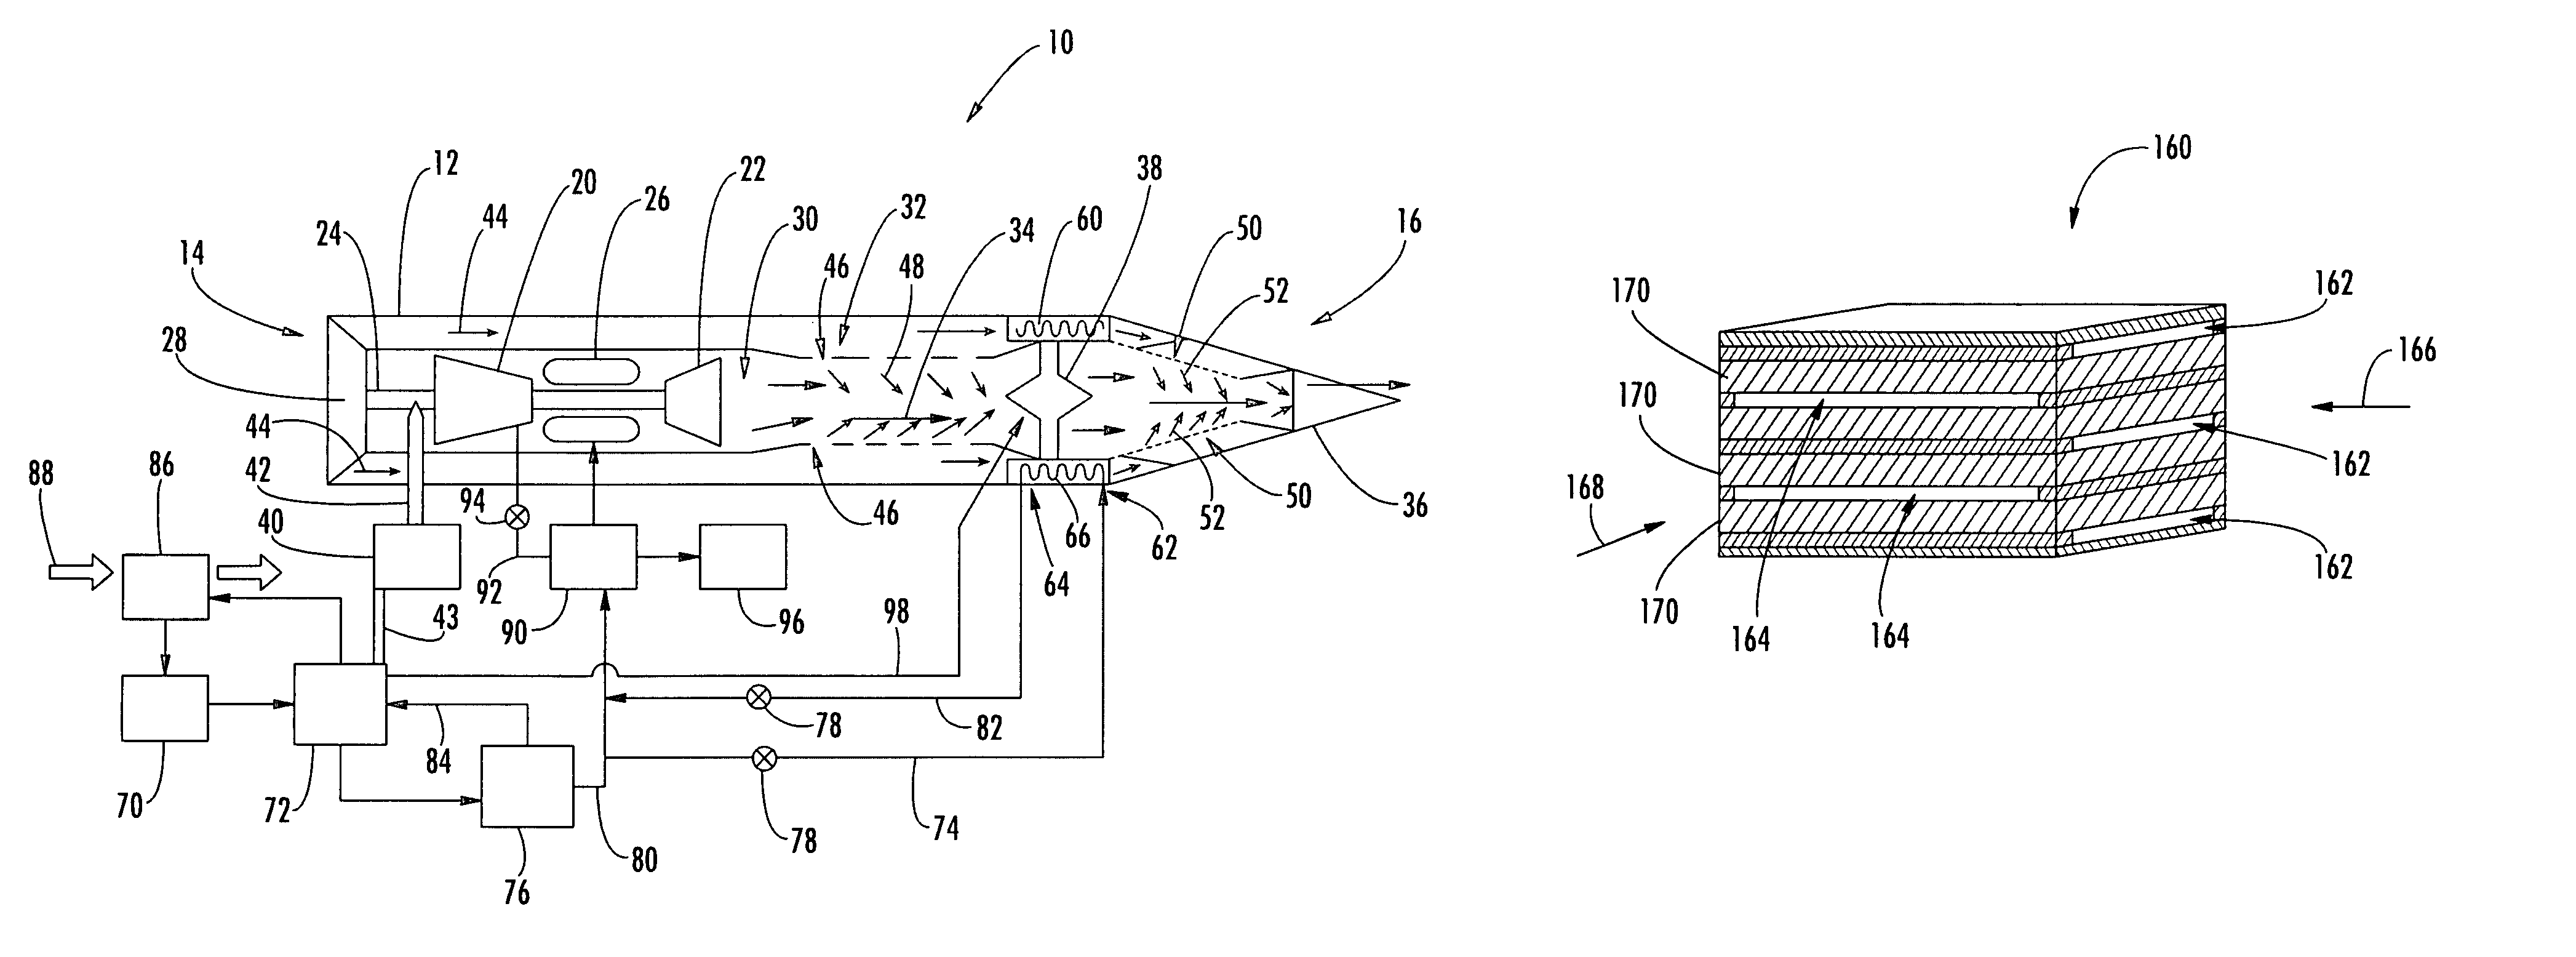 System and method for controlling the temperature and infrared signature of an engine